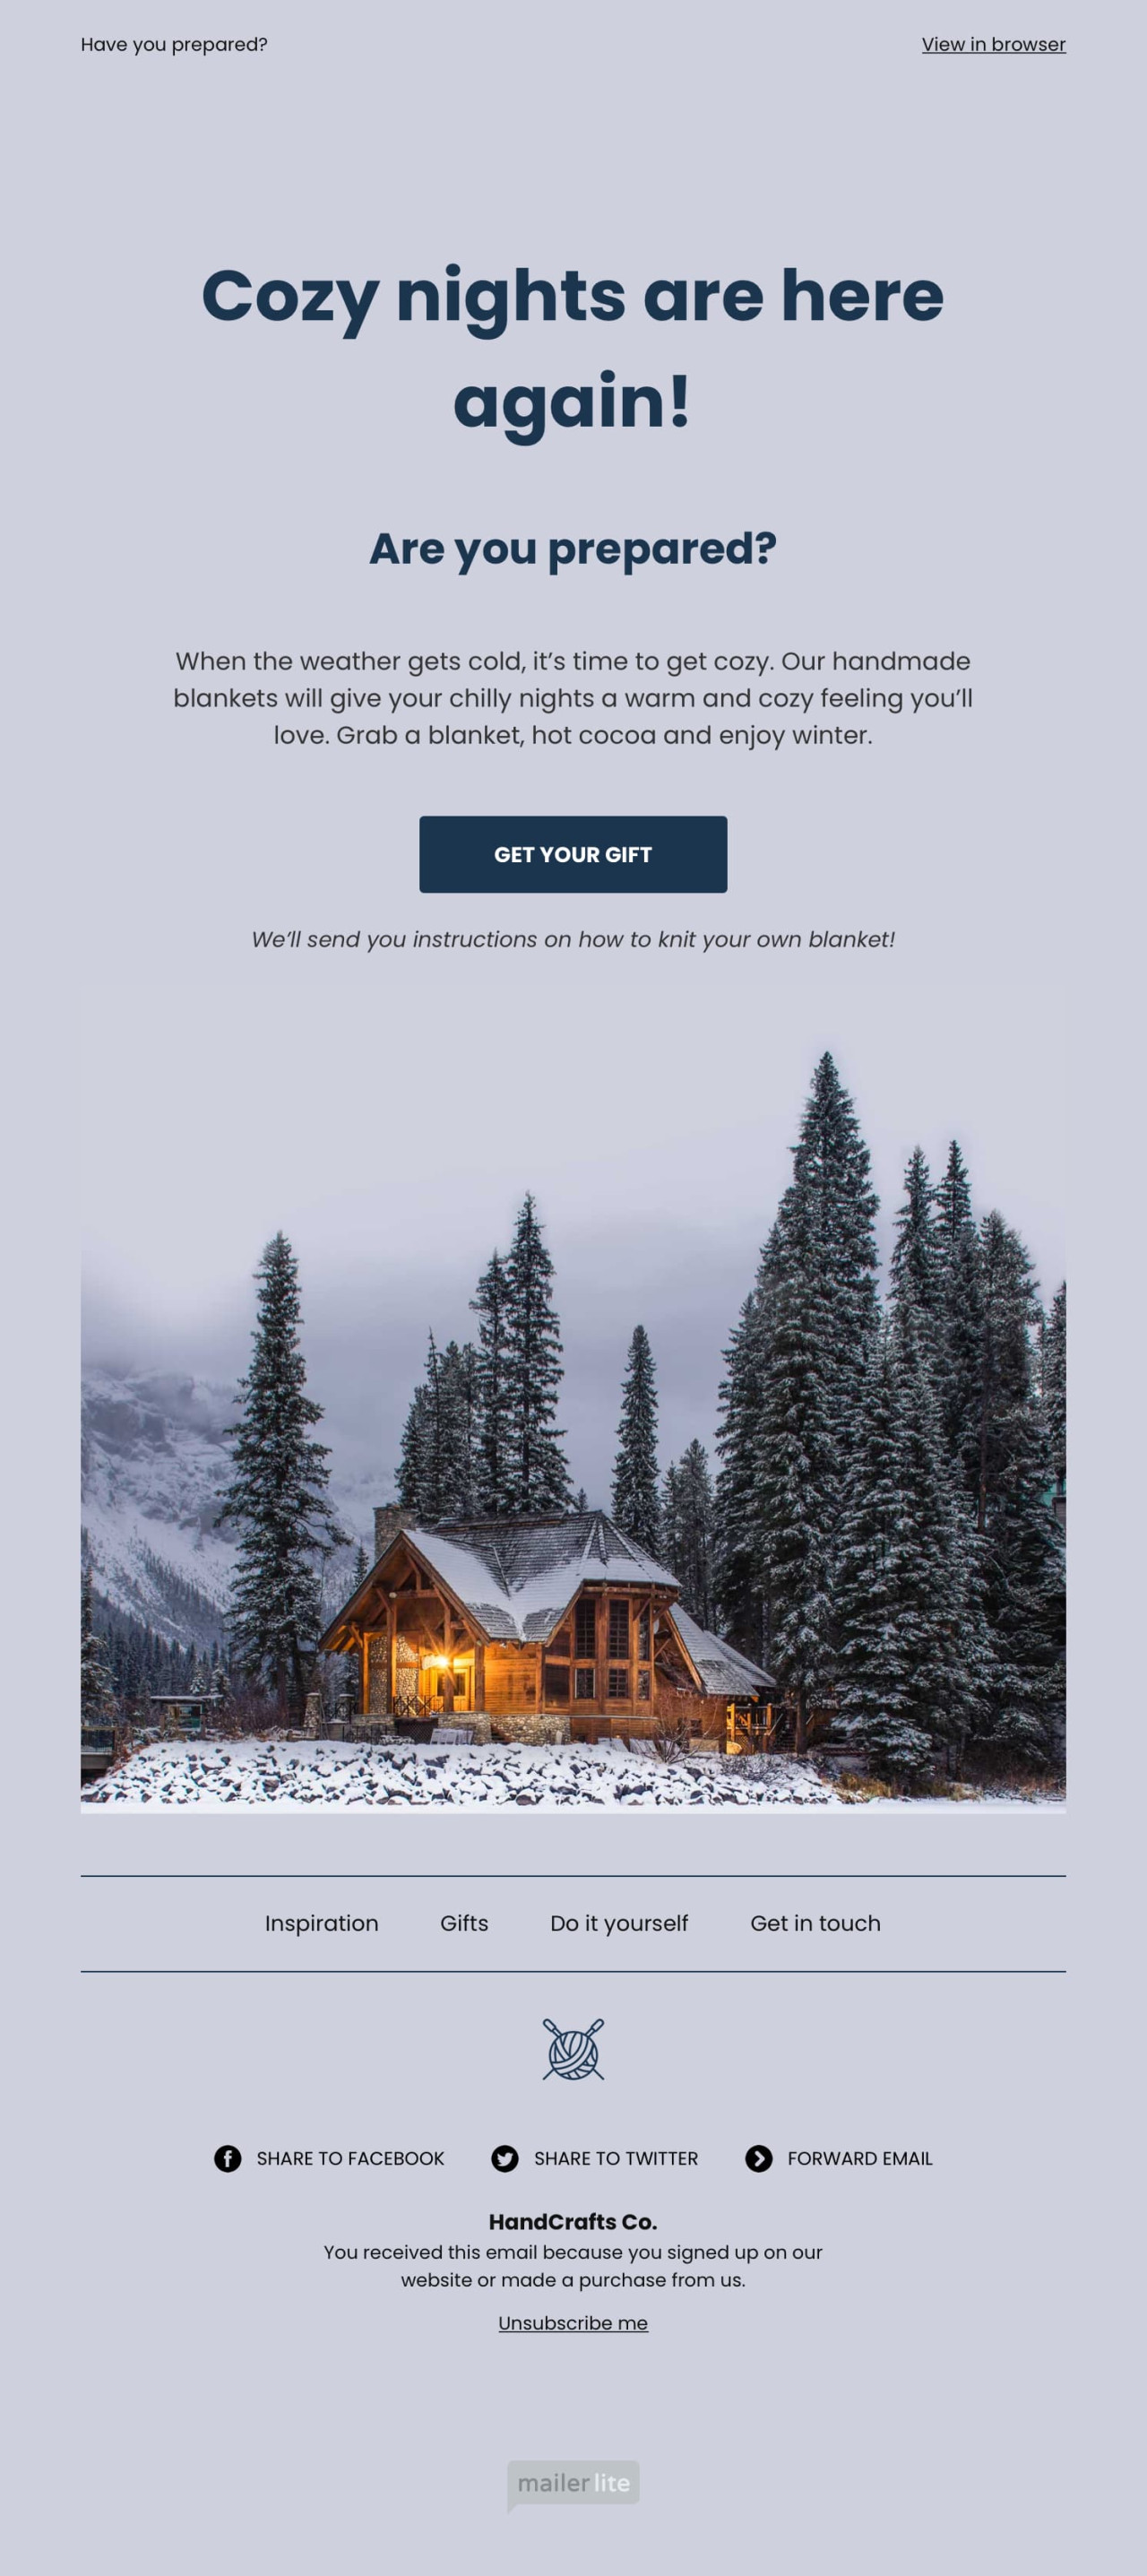 Get your gift email template - Made by MailerLite